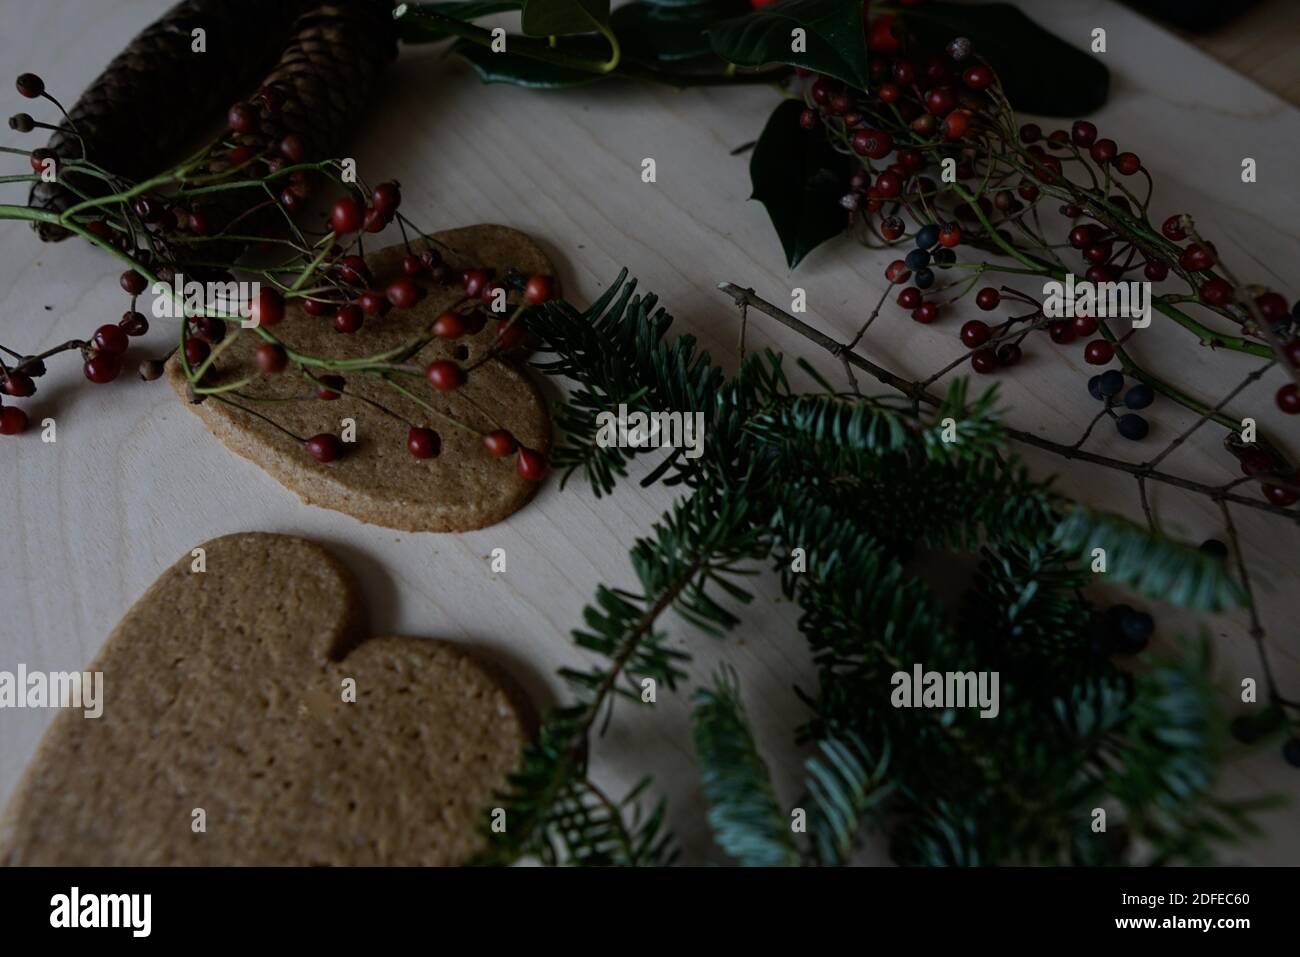 Arrangement of holiday objects and decorations -- green spruce, red berries, ginger heart cookies. Stock Photo